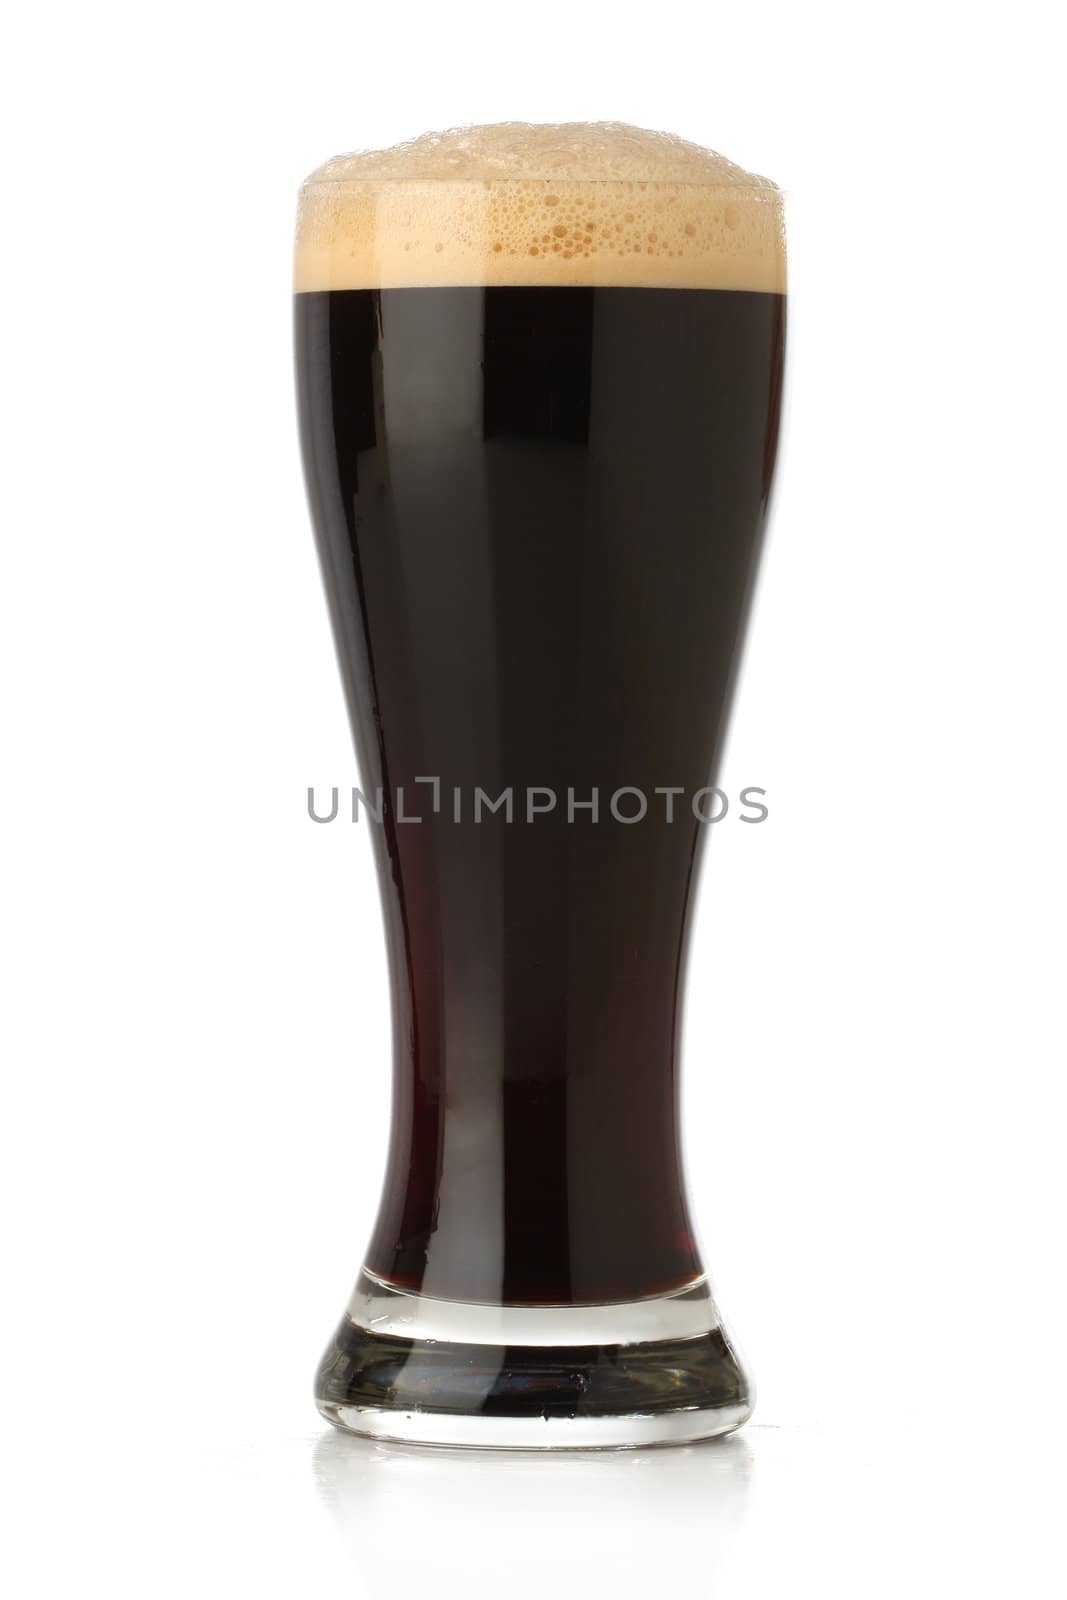 Cold Stout beer glass isolated  by Erdosain